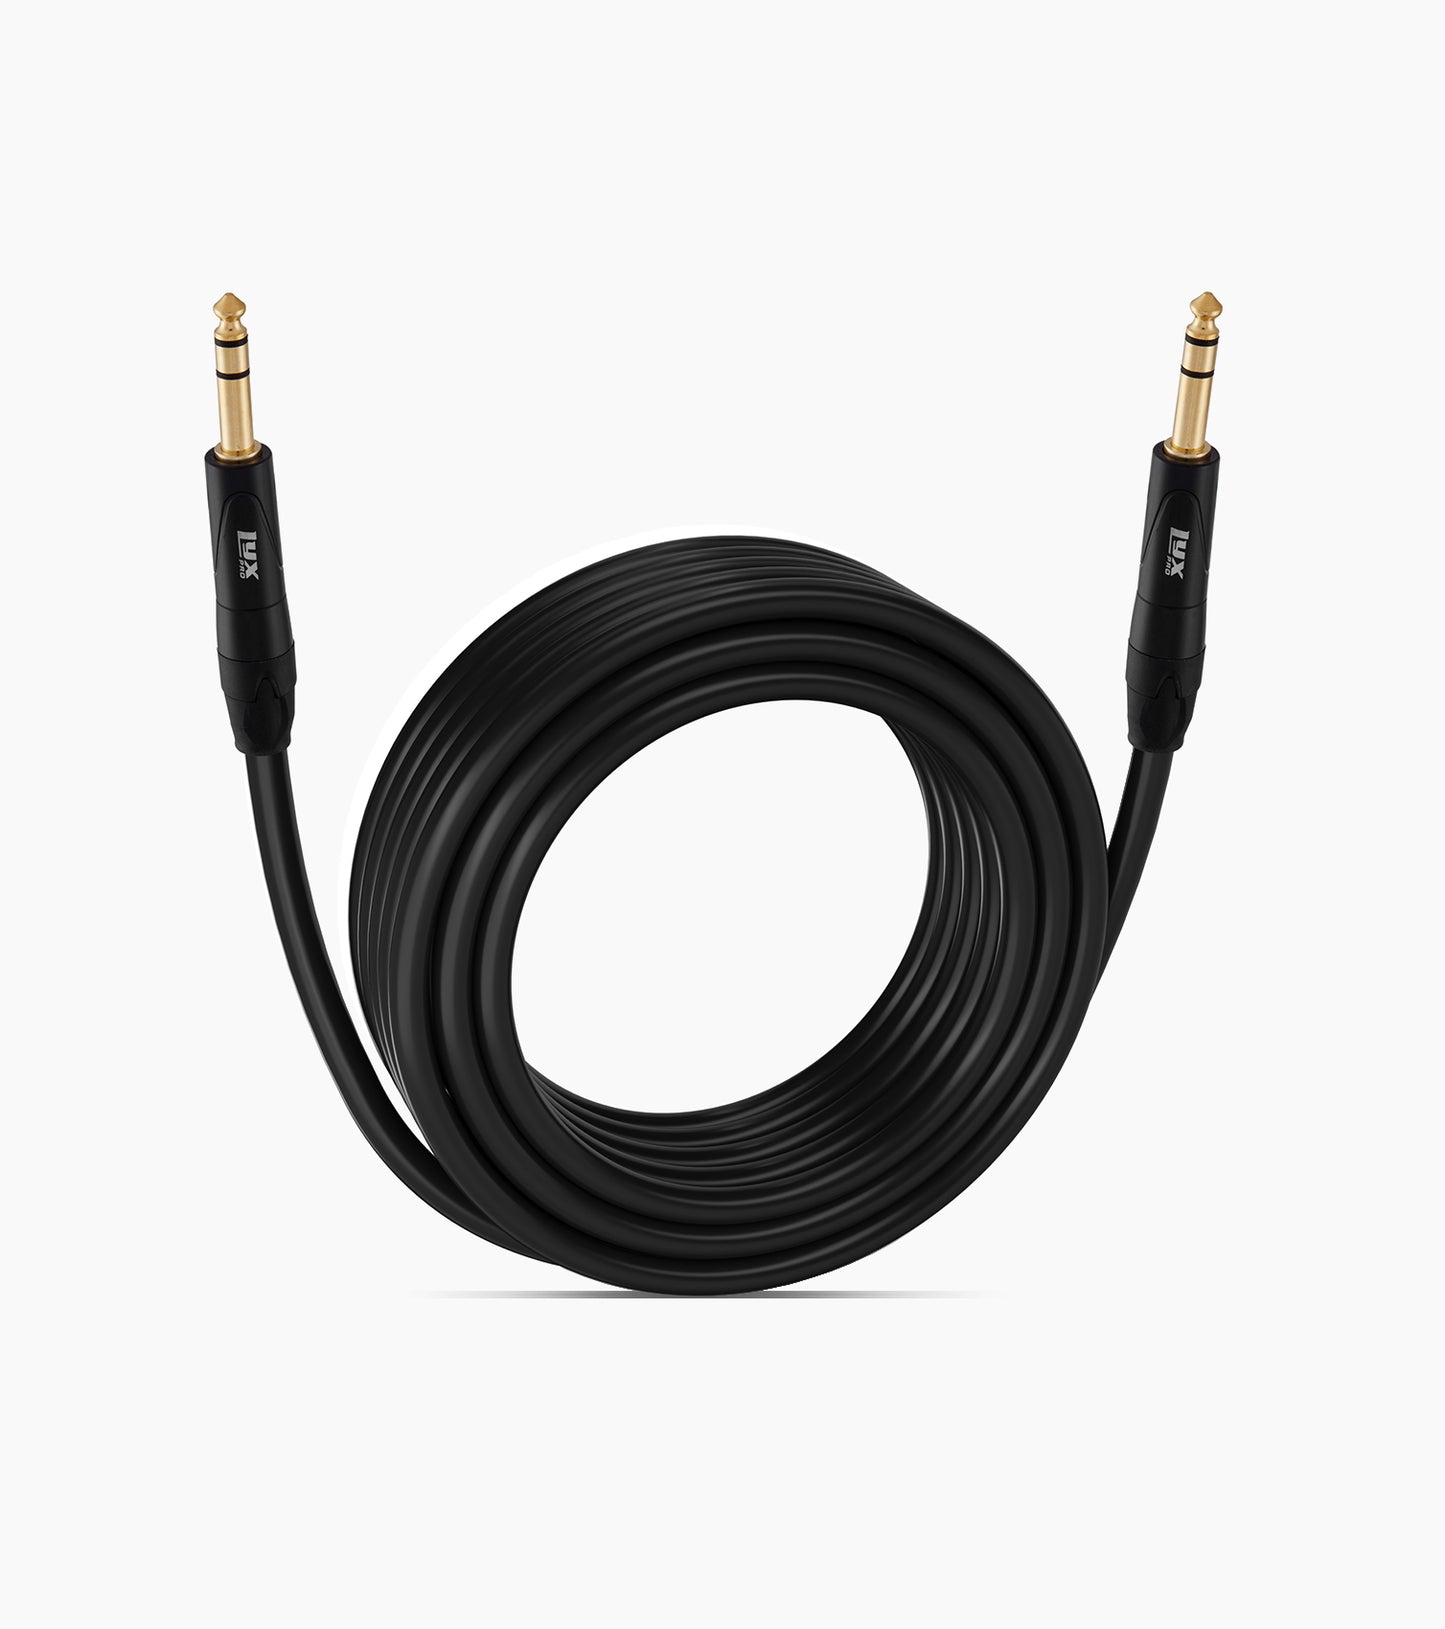 50 ft TRS audio cable